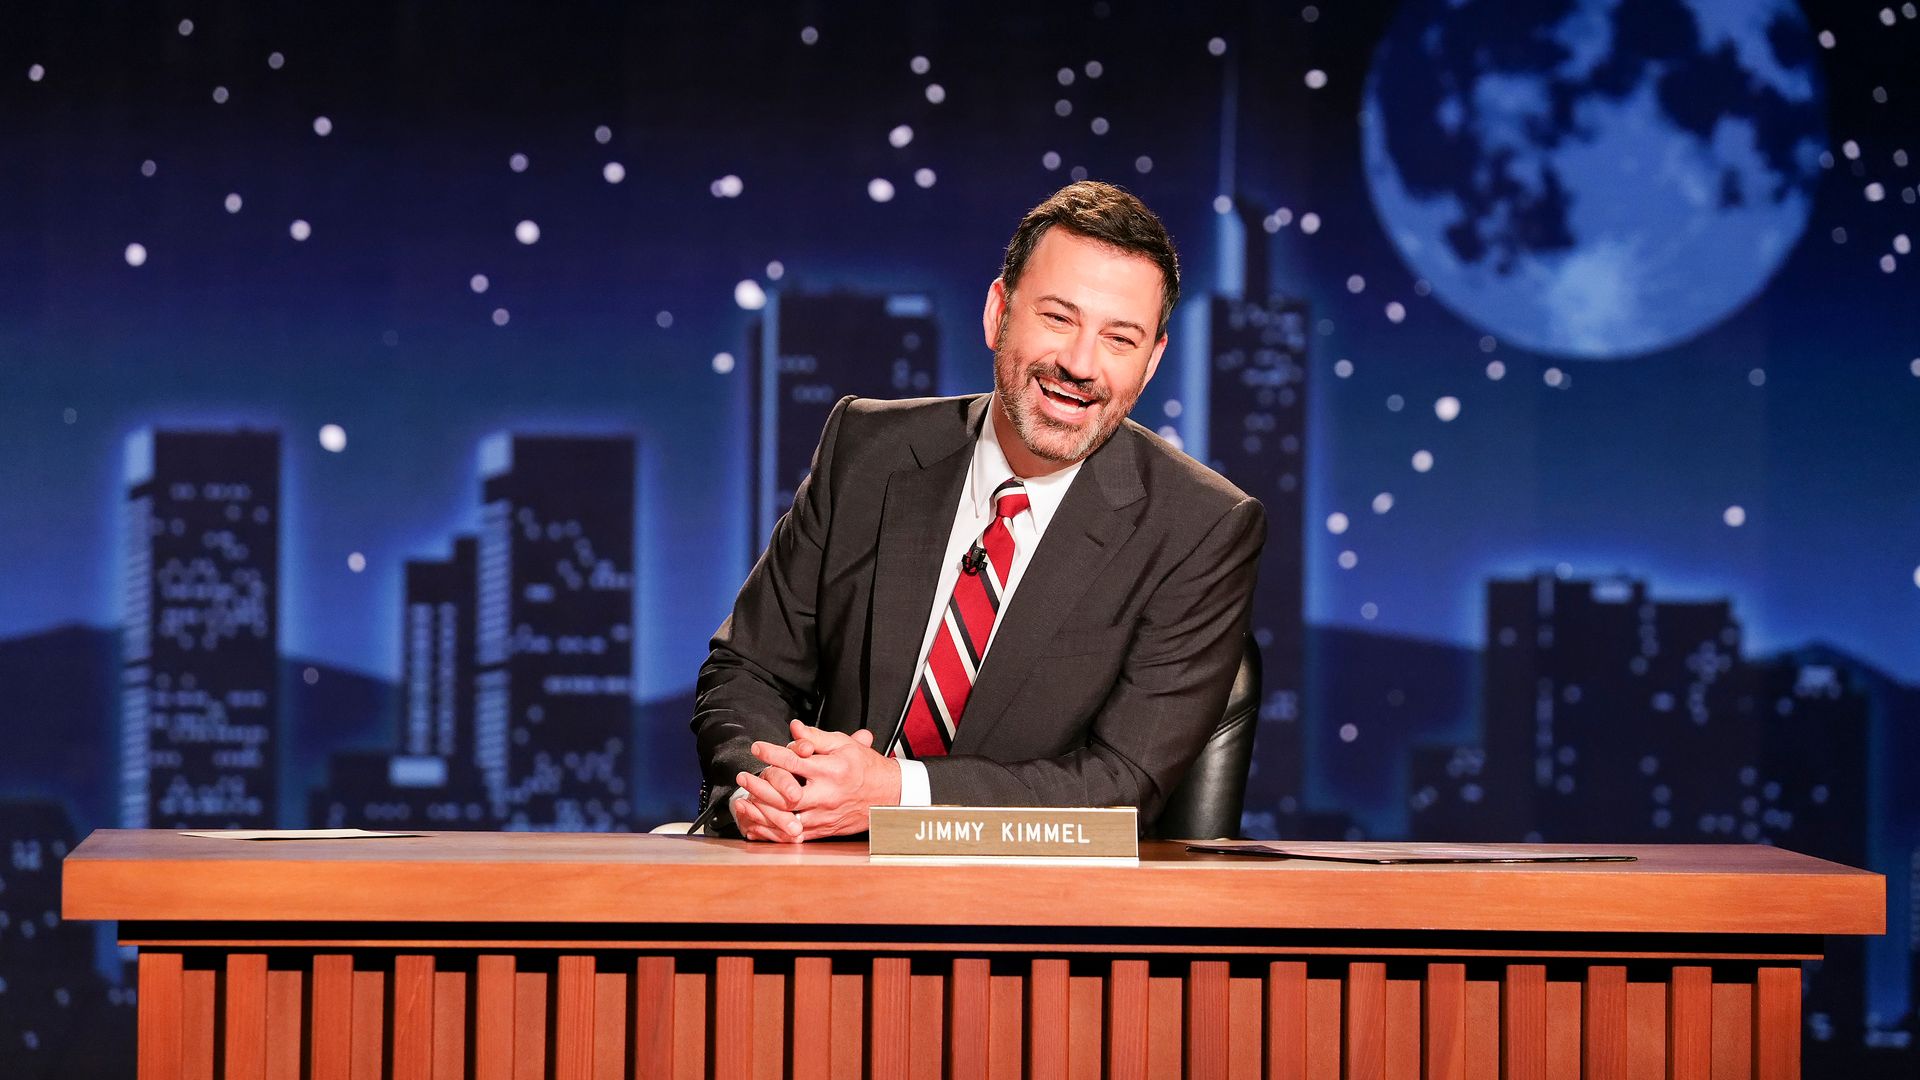 Jimmy Kimmel Live! is among the many late night shows going dark this week